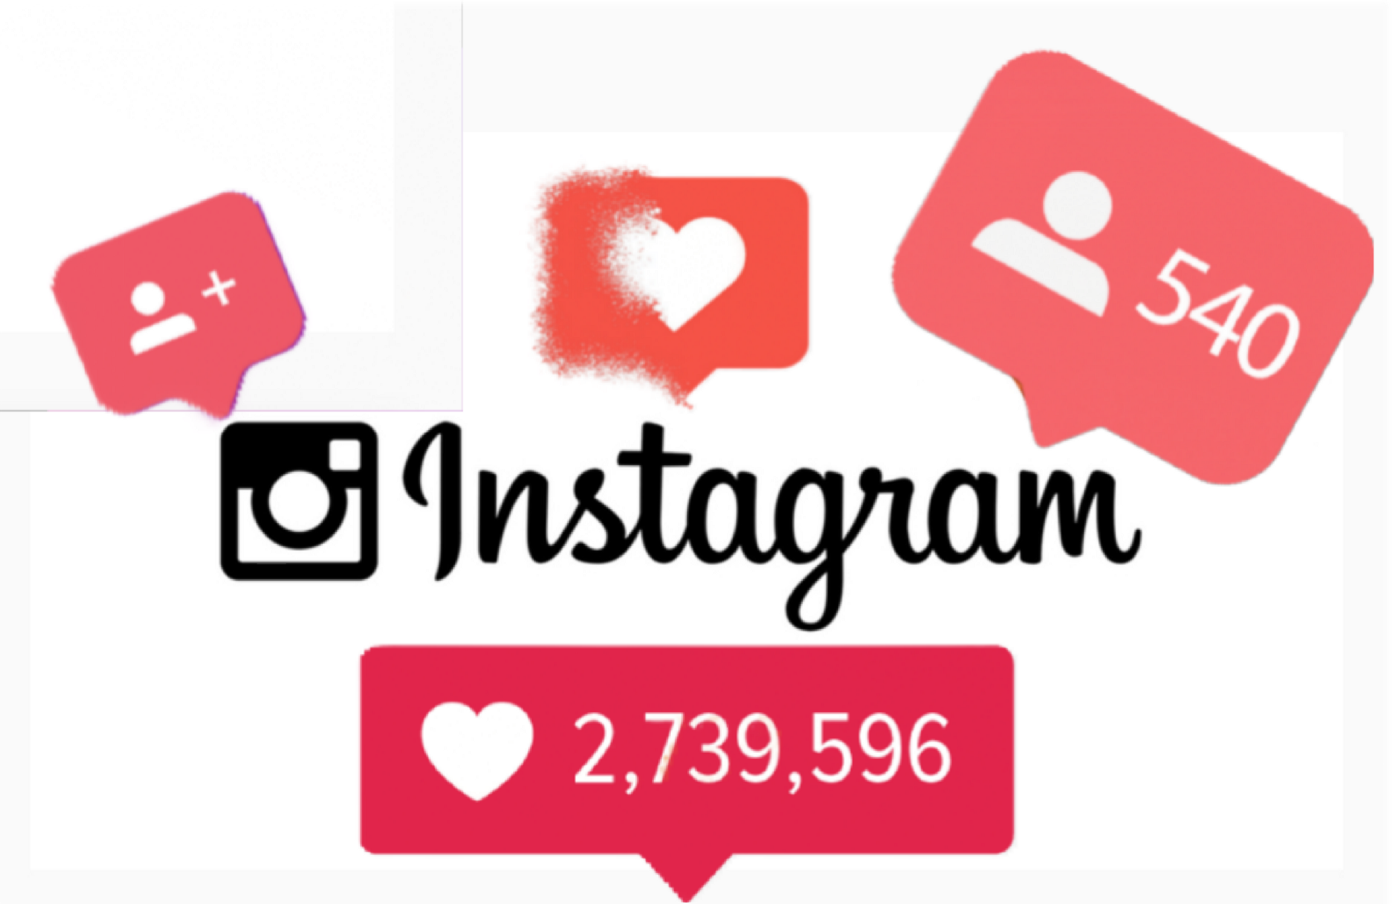 Best way to get followers Instagram: What is it?